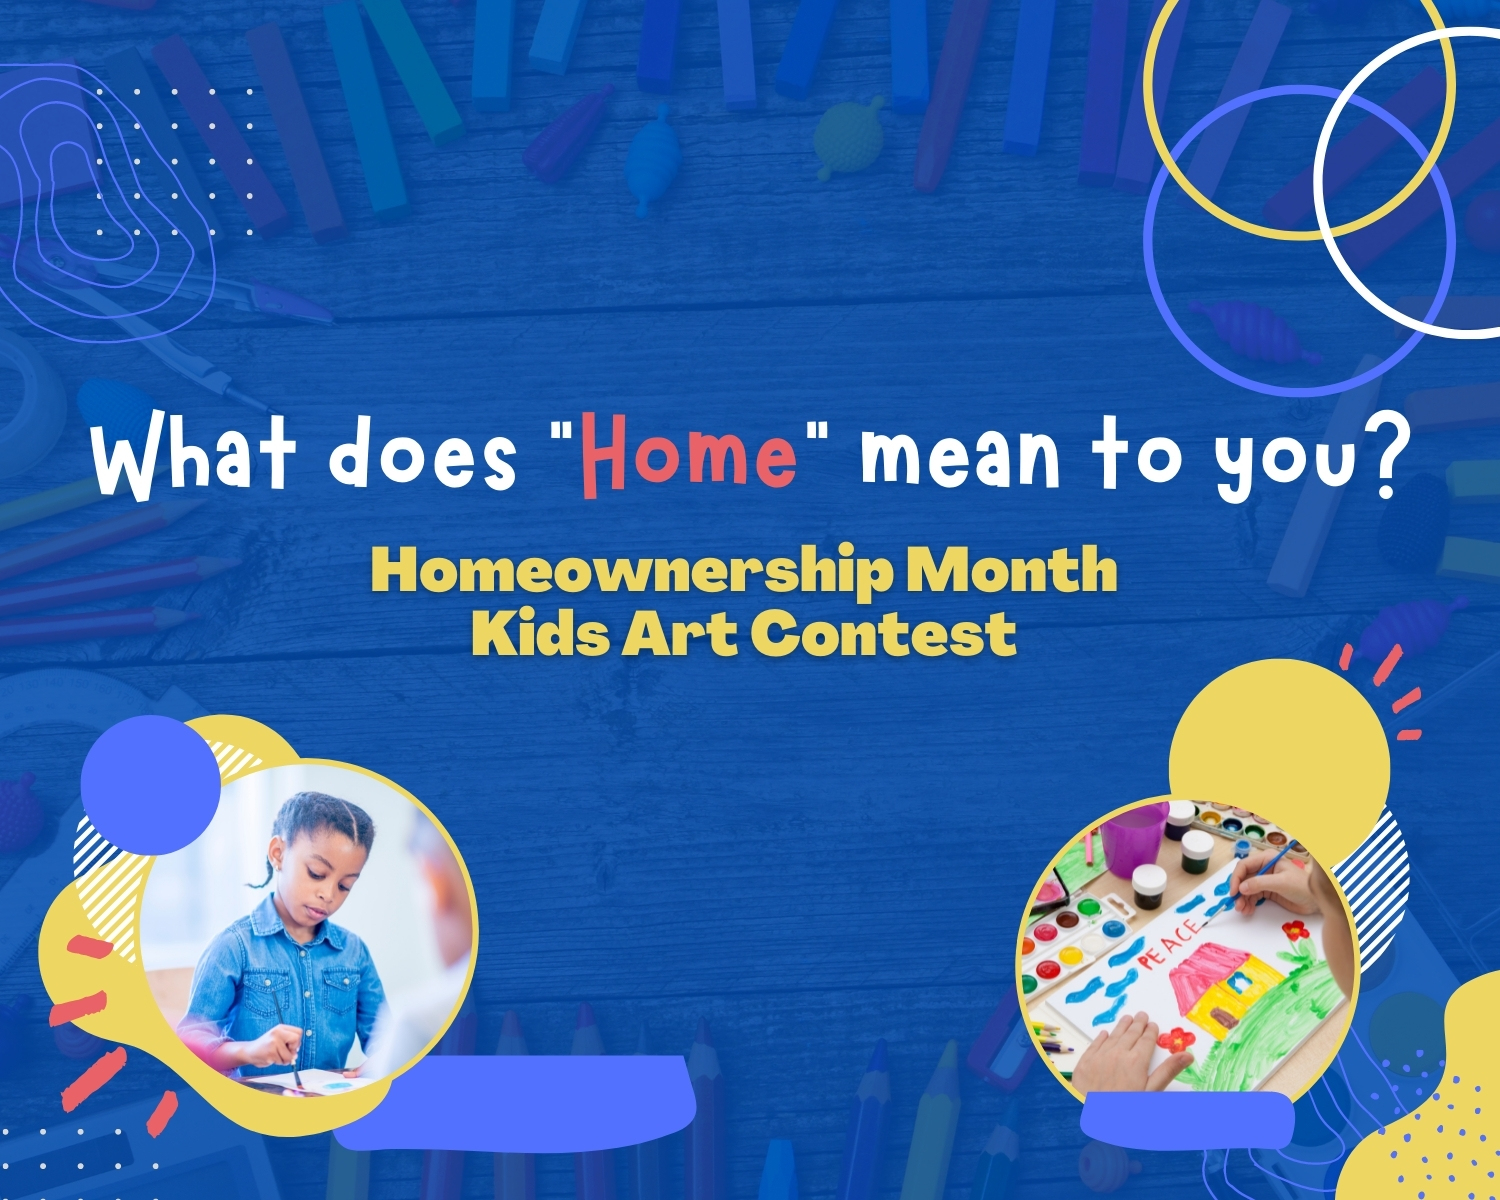 Kids Art Contest Celebrating Homeownership Month Now Open